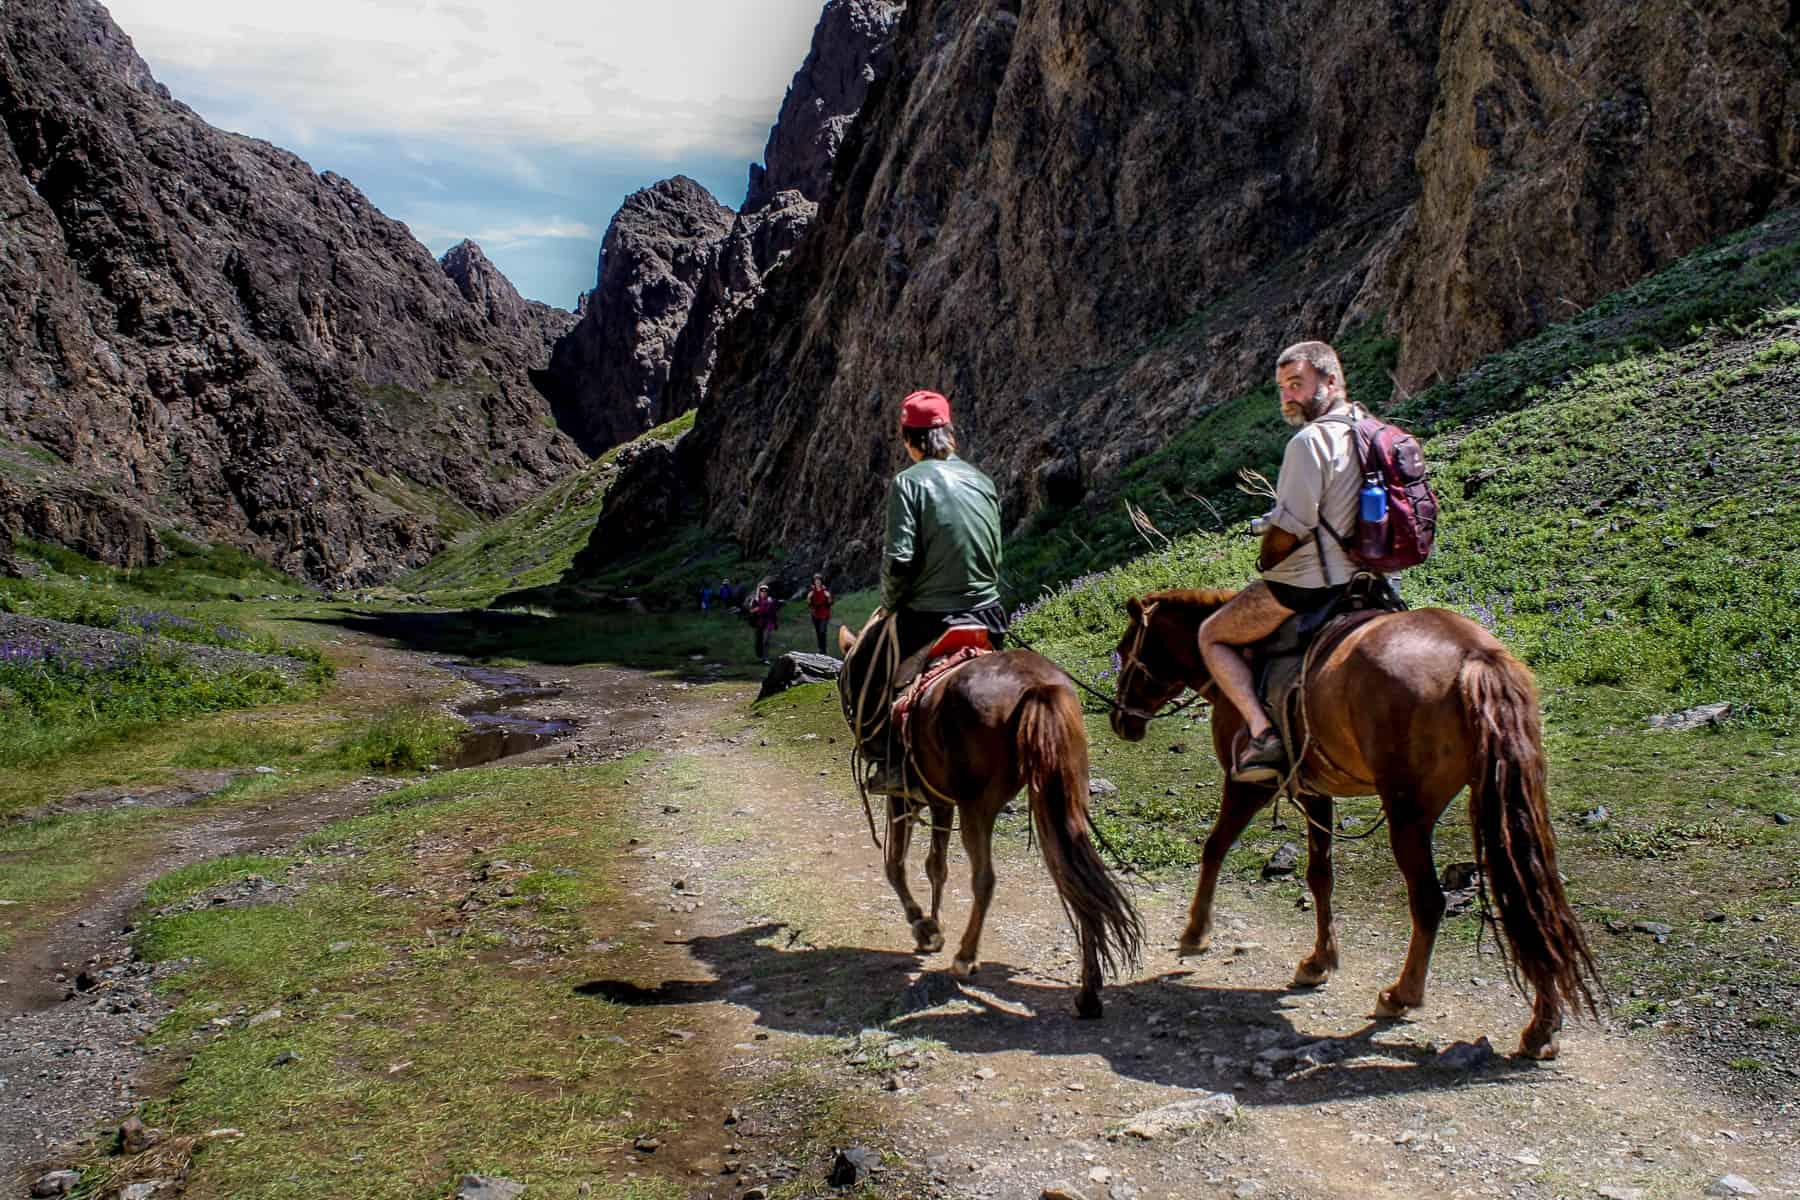 Two men travel by horseback in the Yolin Am valley in Mongolia